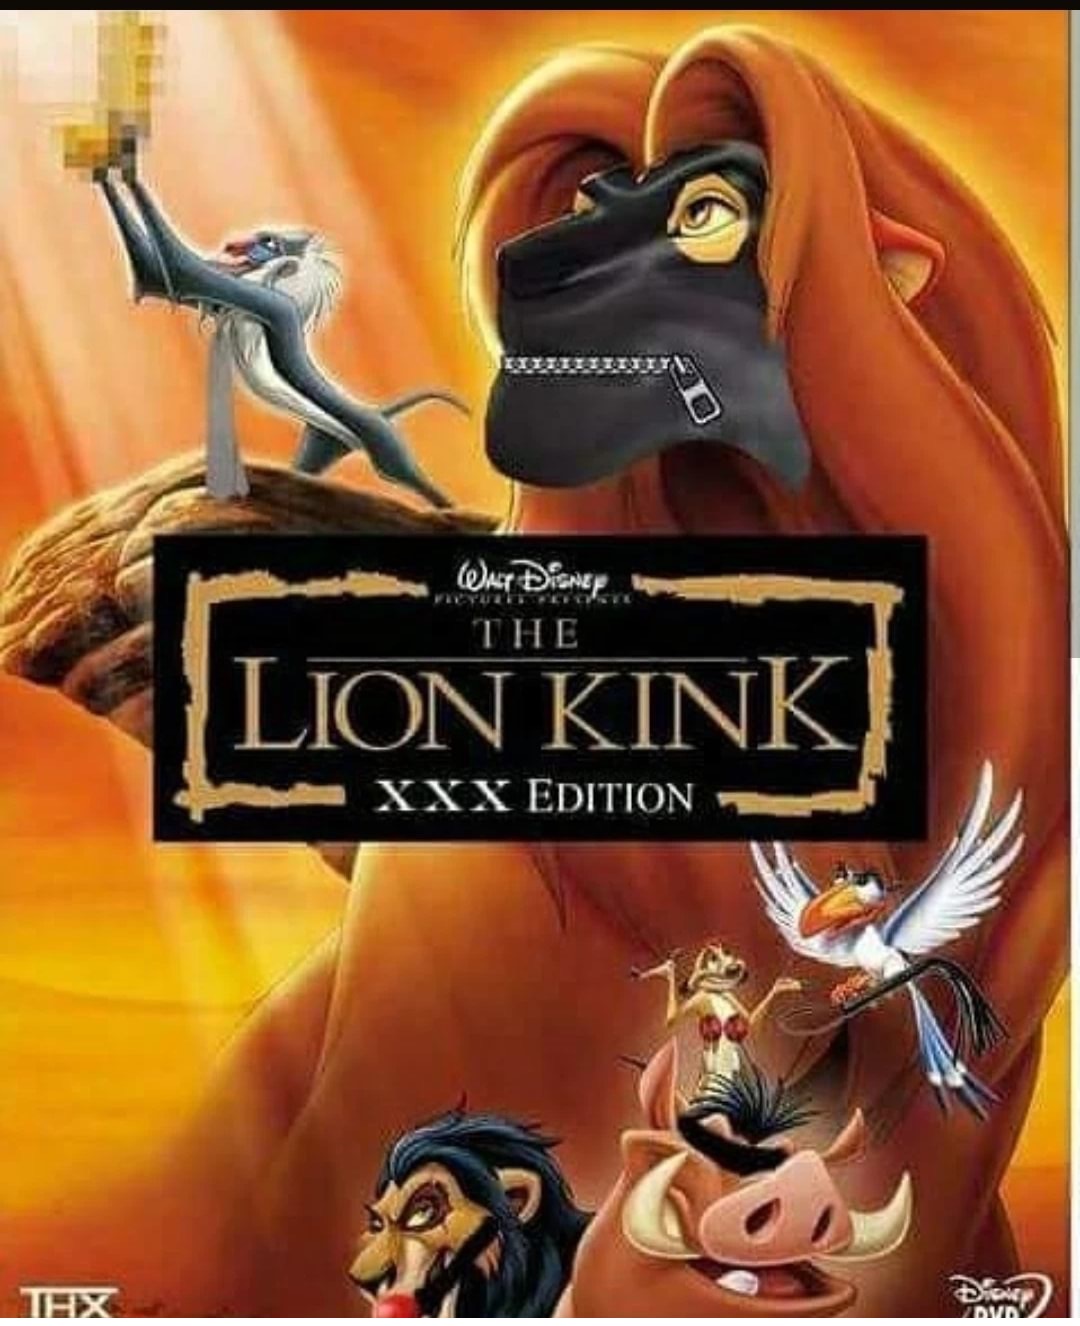 funny meme - lion king special edition - War Dioner. The Lion Kink Xxx Edition Tex top